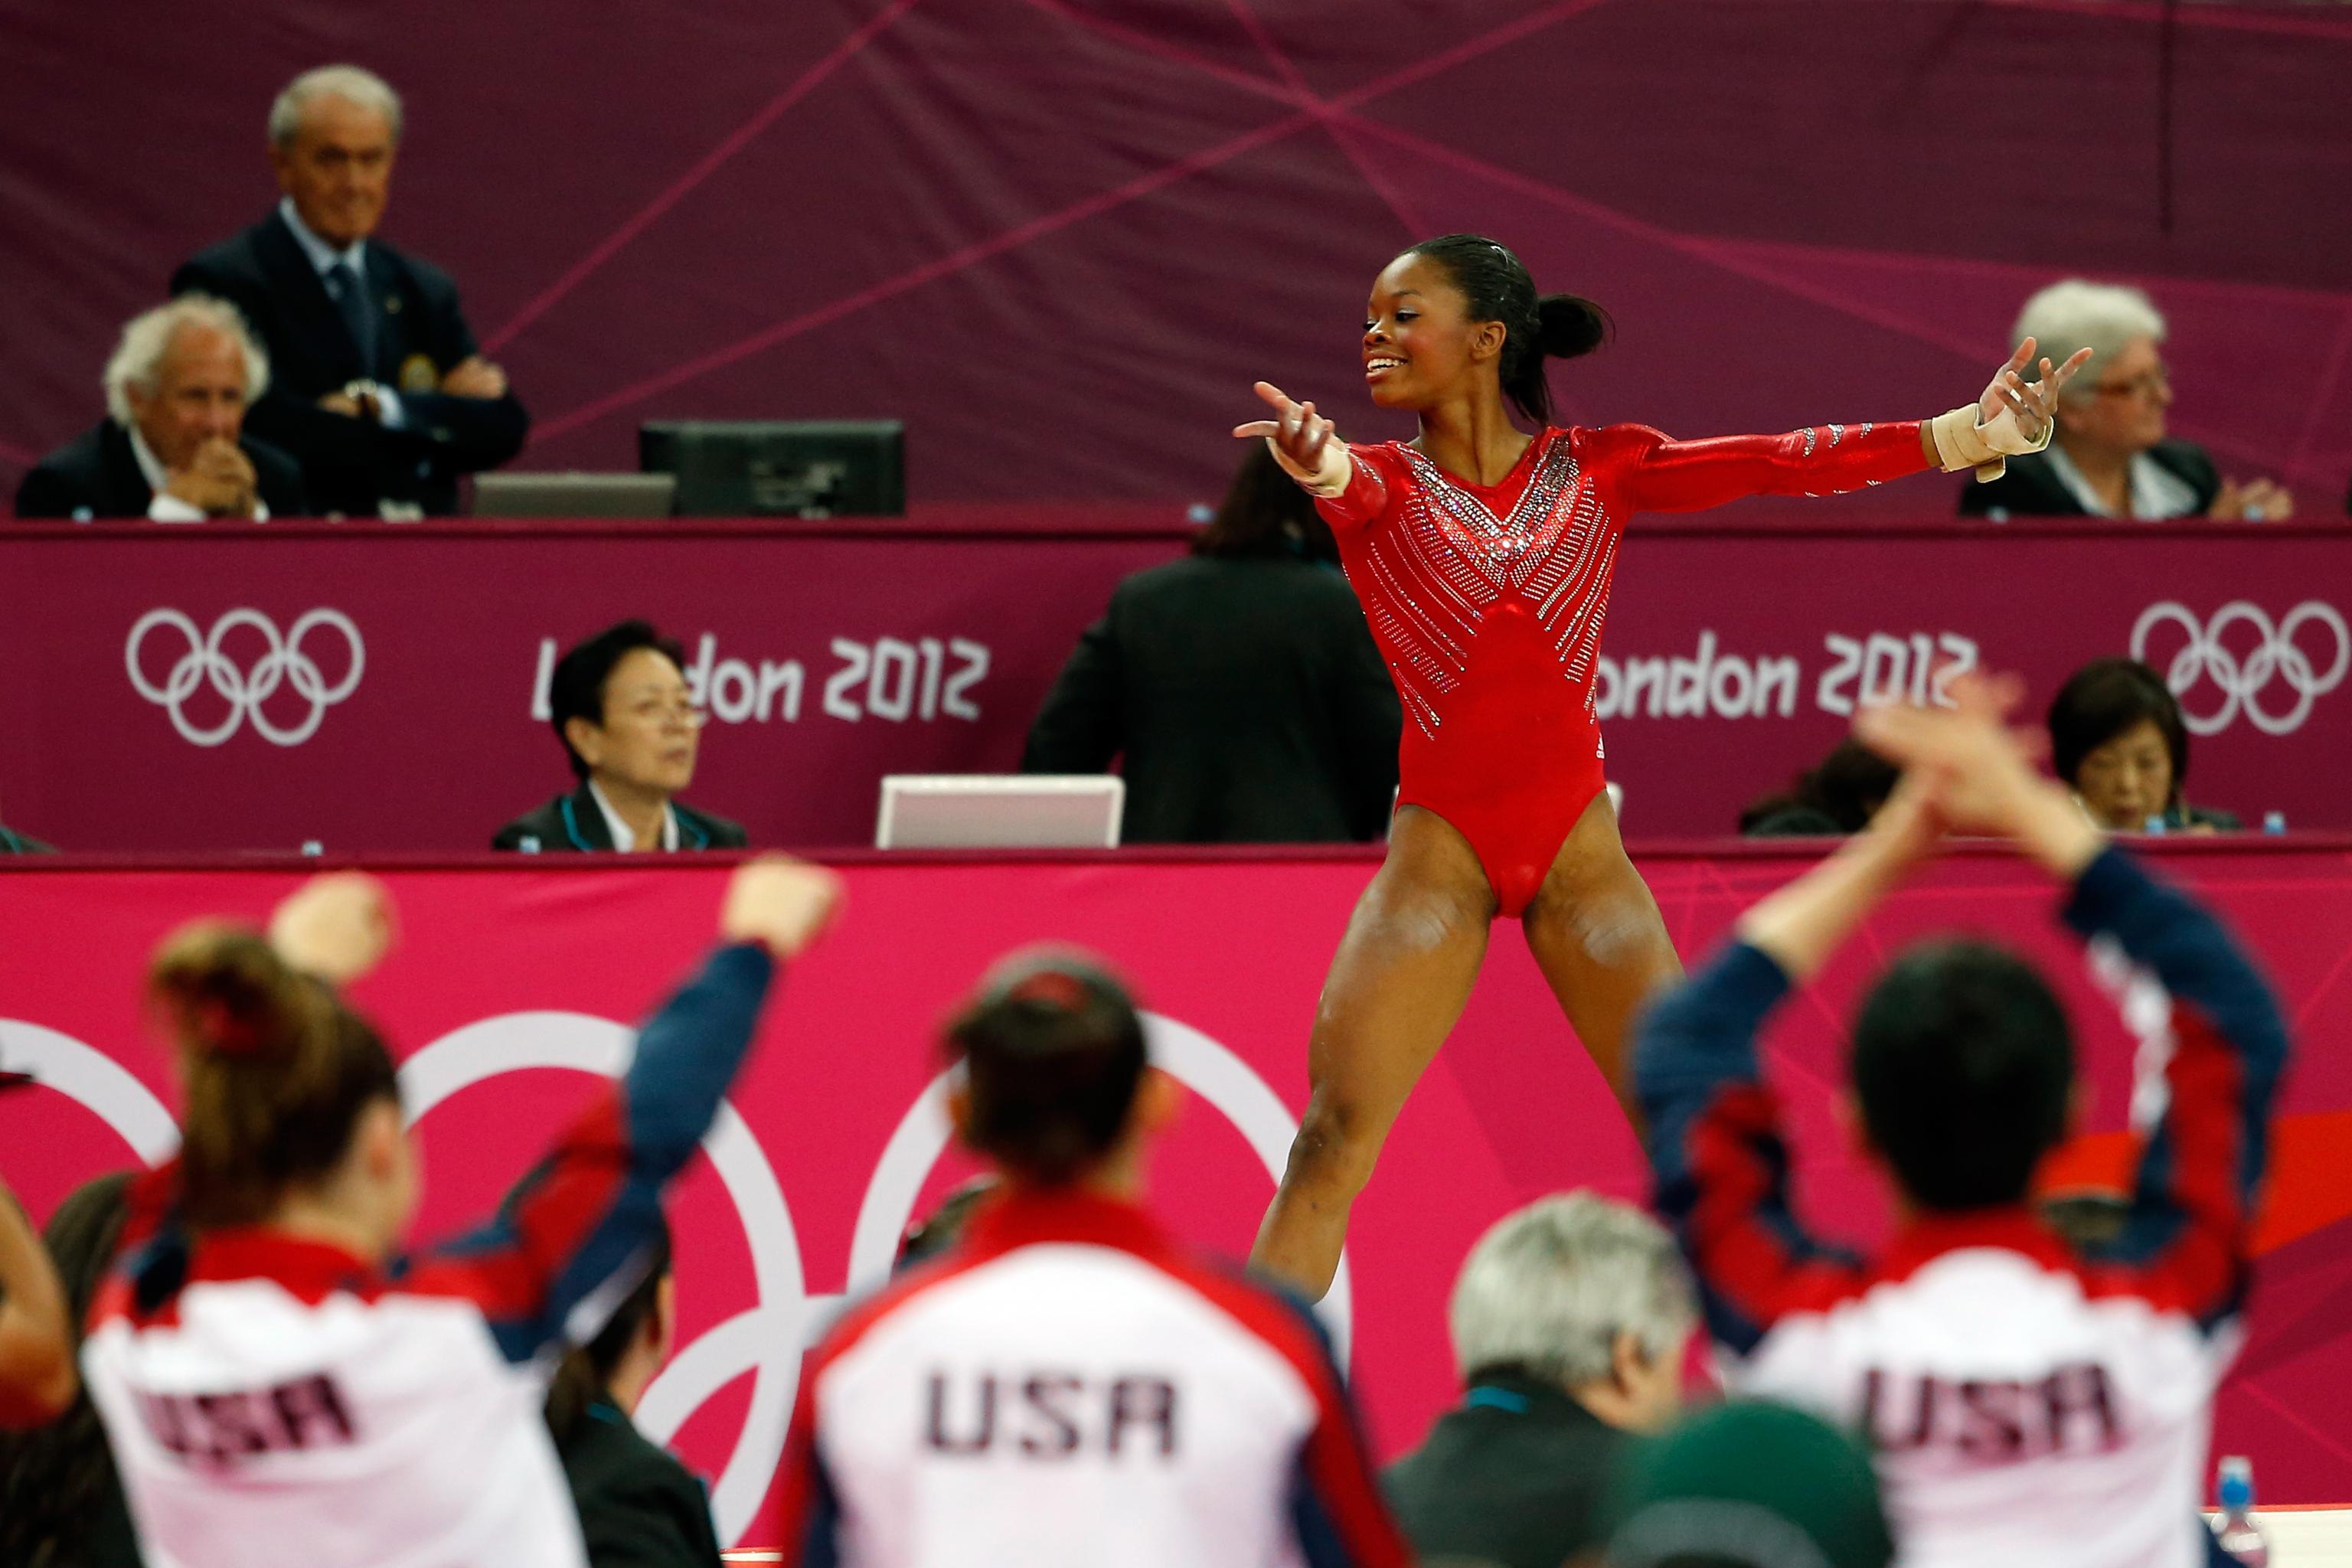 All Around Gold Would Make Gabby Douglas Most Decorated Gymnast In